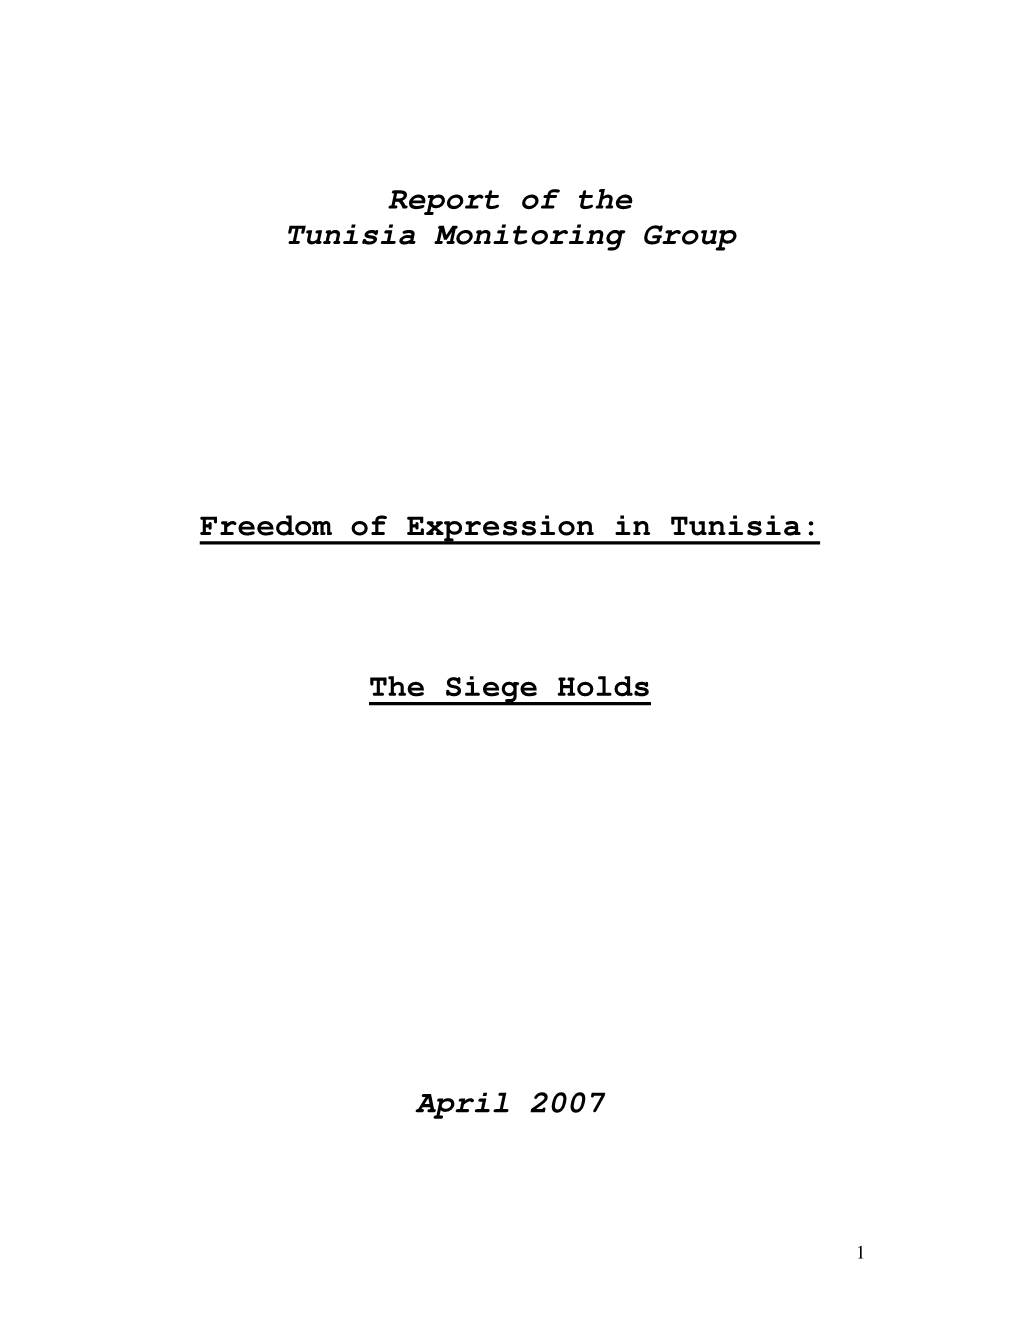 Report of the Tunisia Monitoring Group Freedom of Expression In